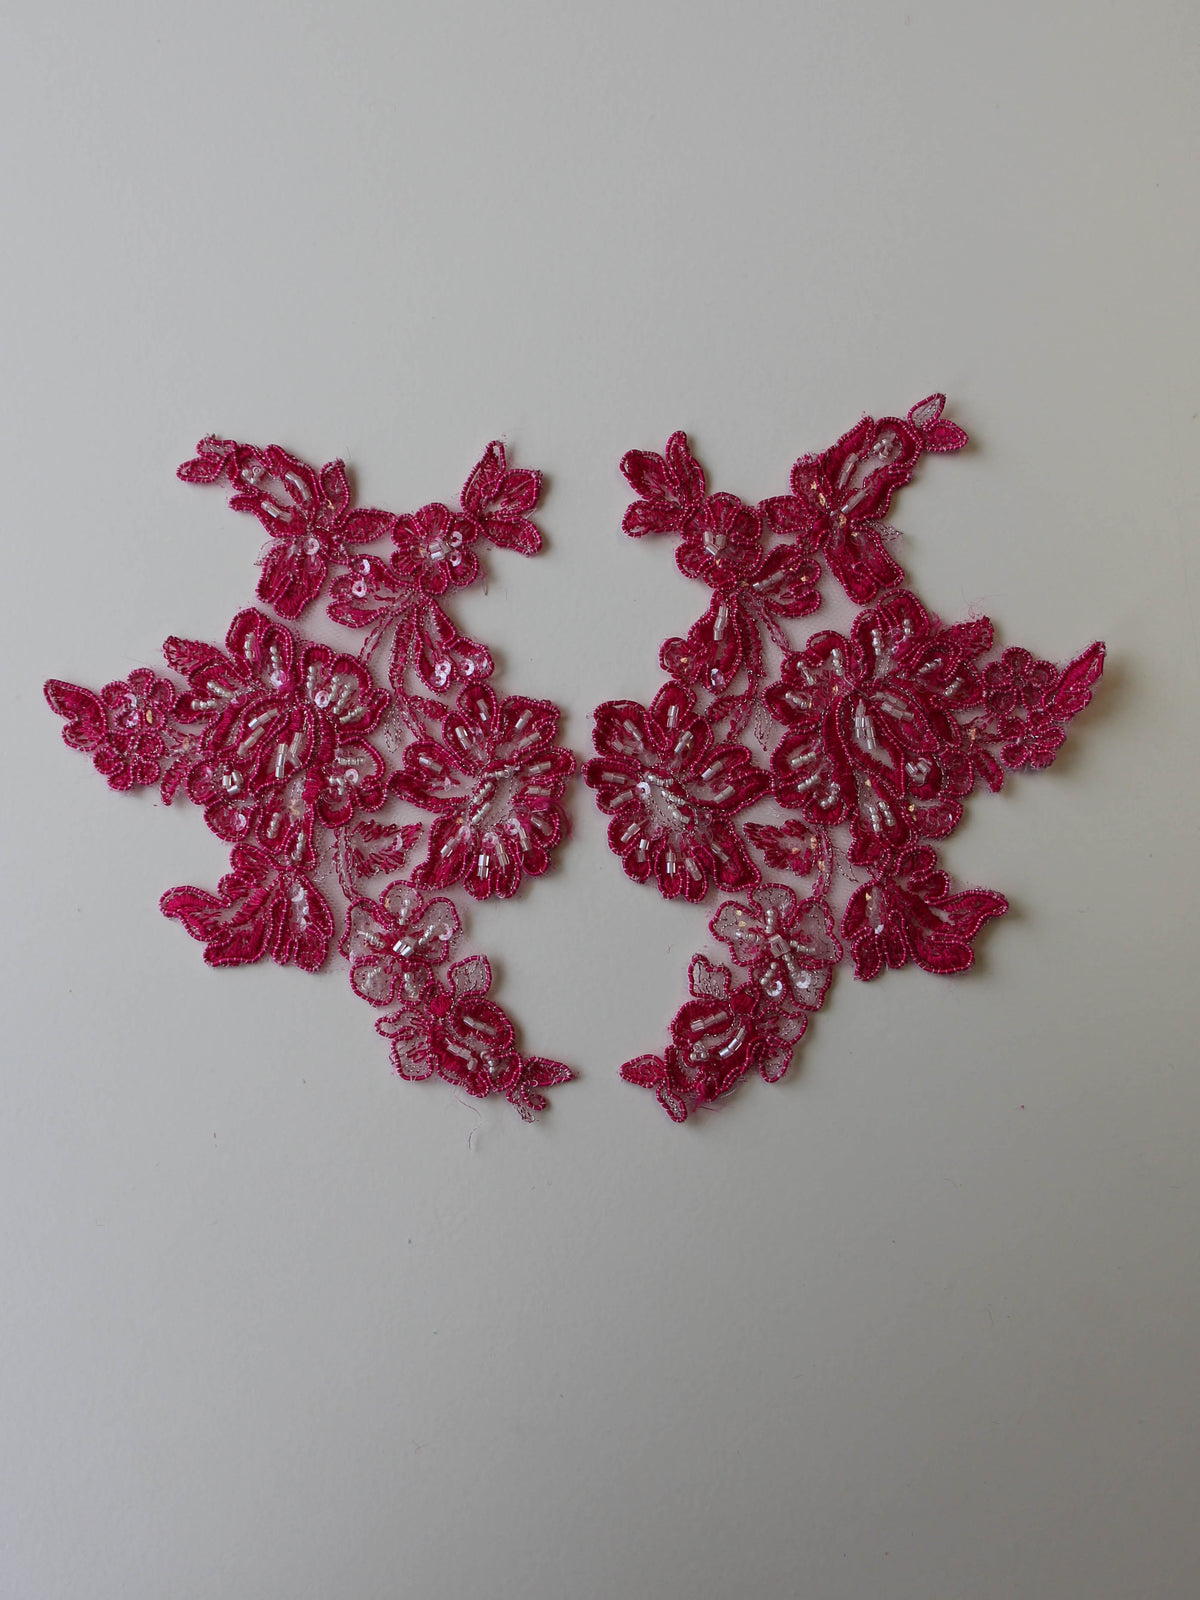 Passion Pink Beaded Lace Appliques - Victoria